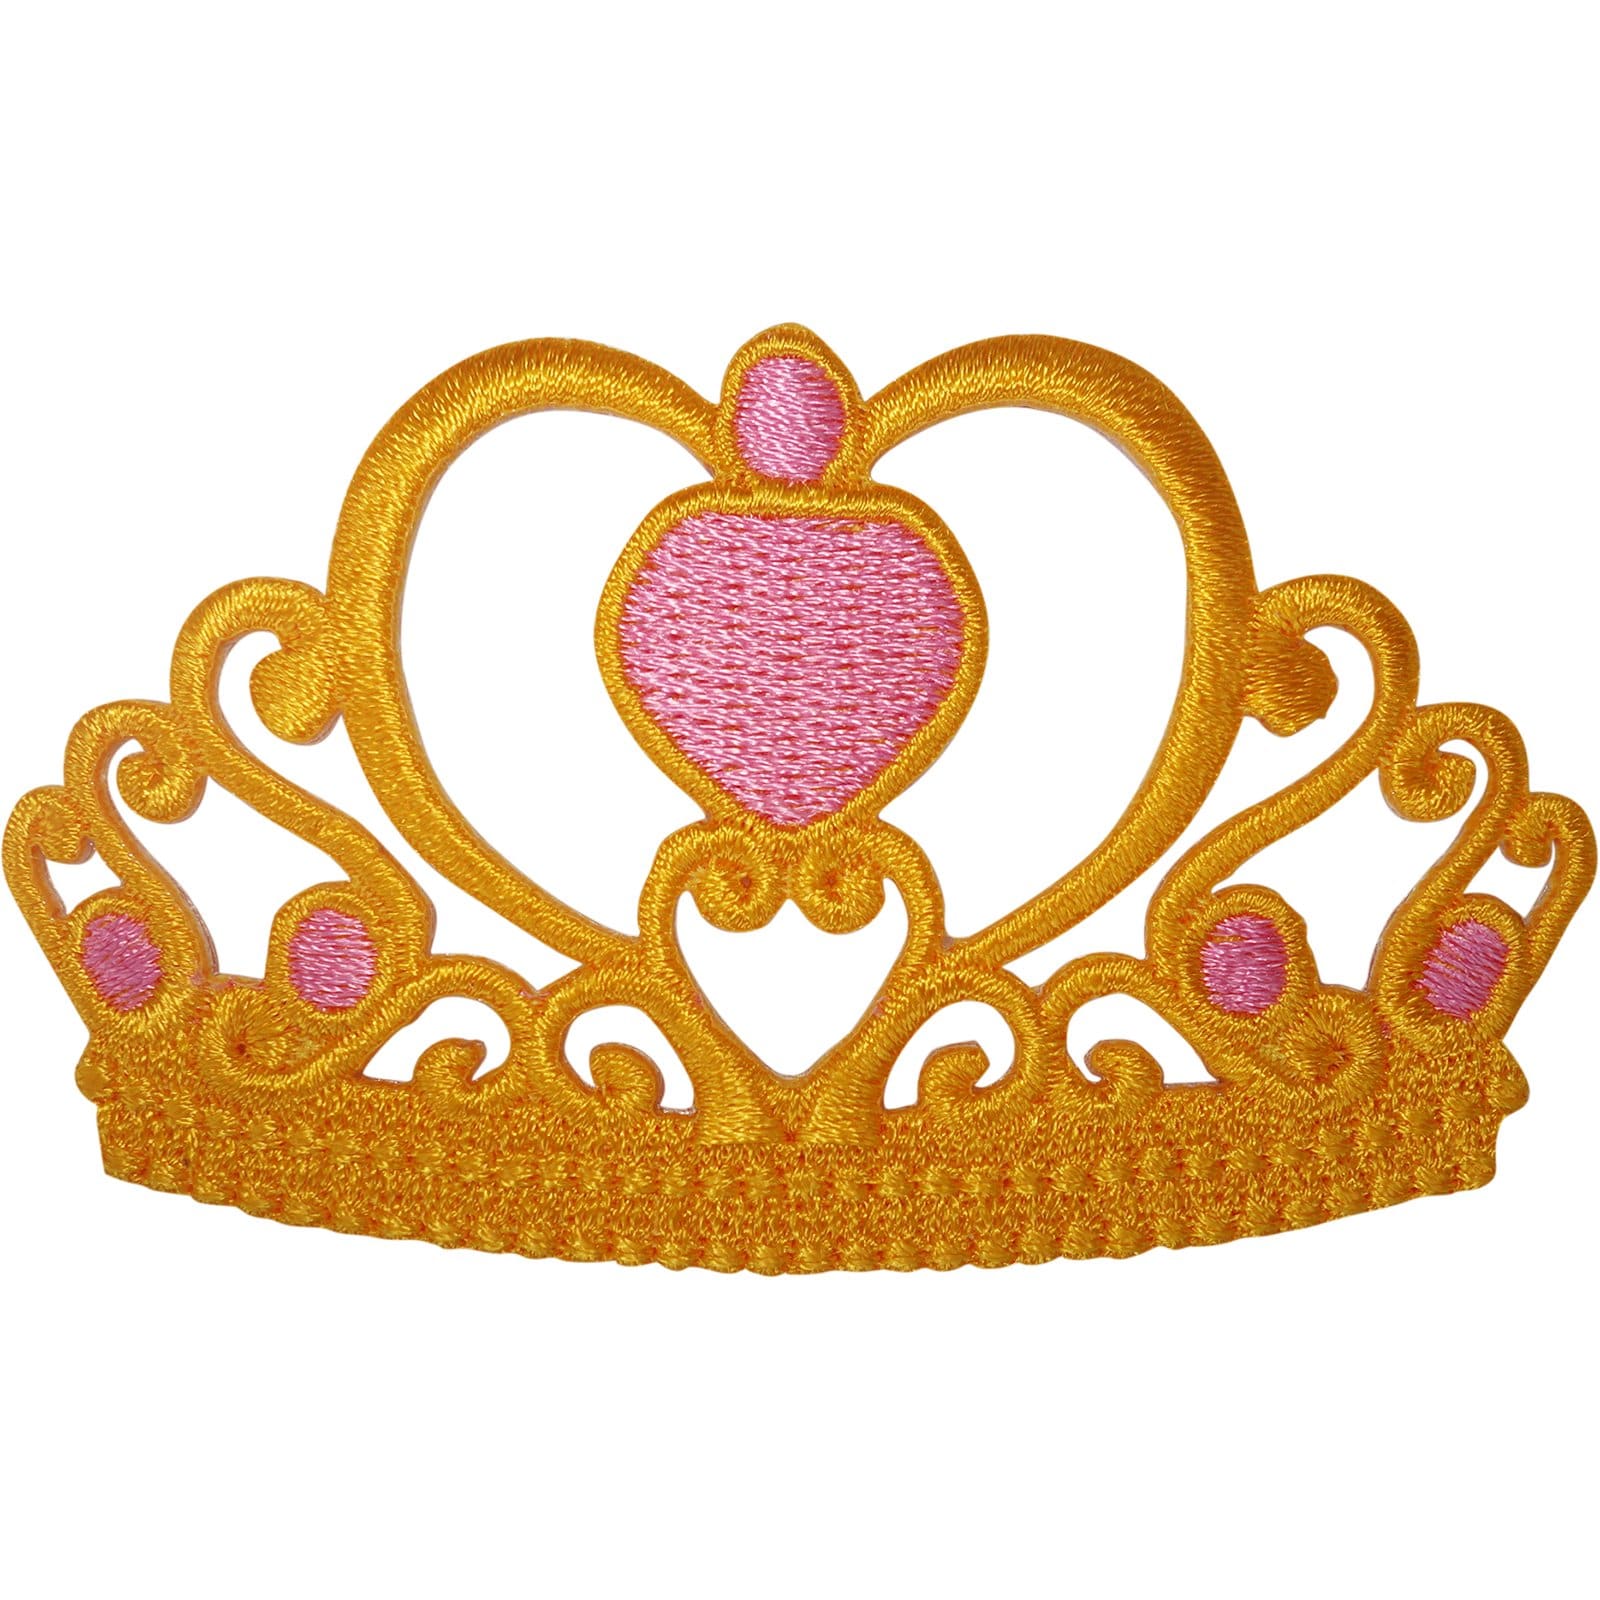 Princess Queen Gold Crown Tiara Patch Iron On Sew On Embroidered Badge Applique